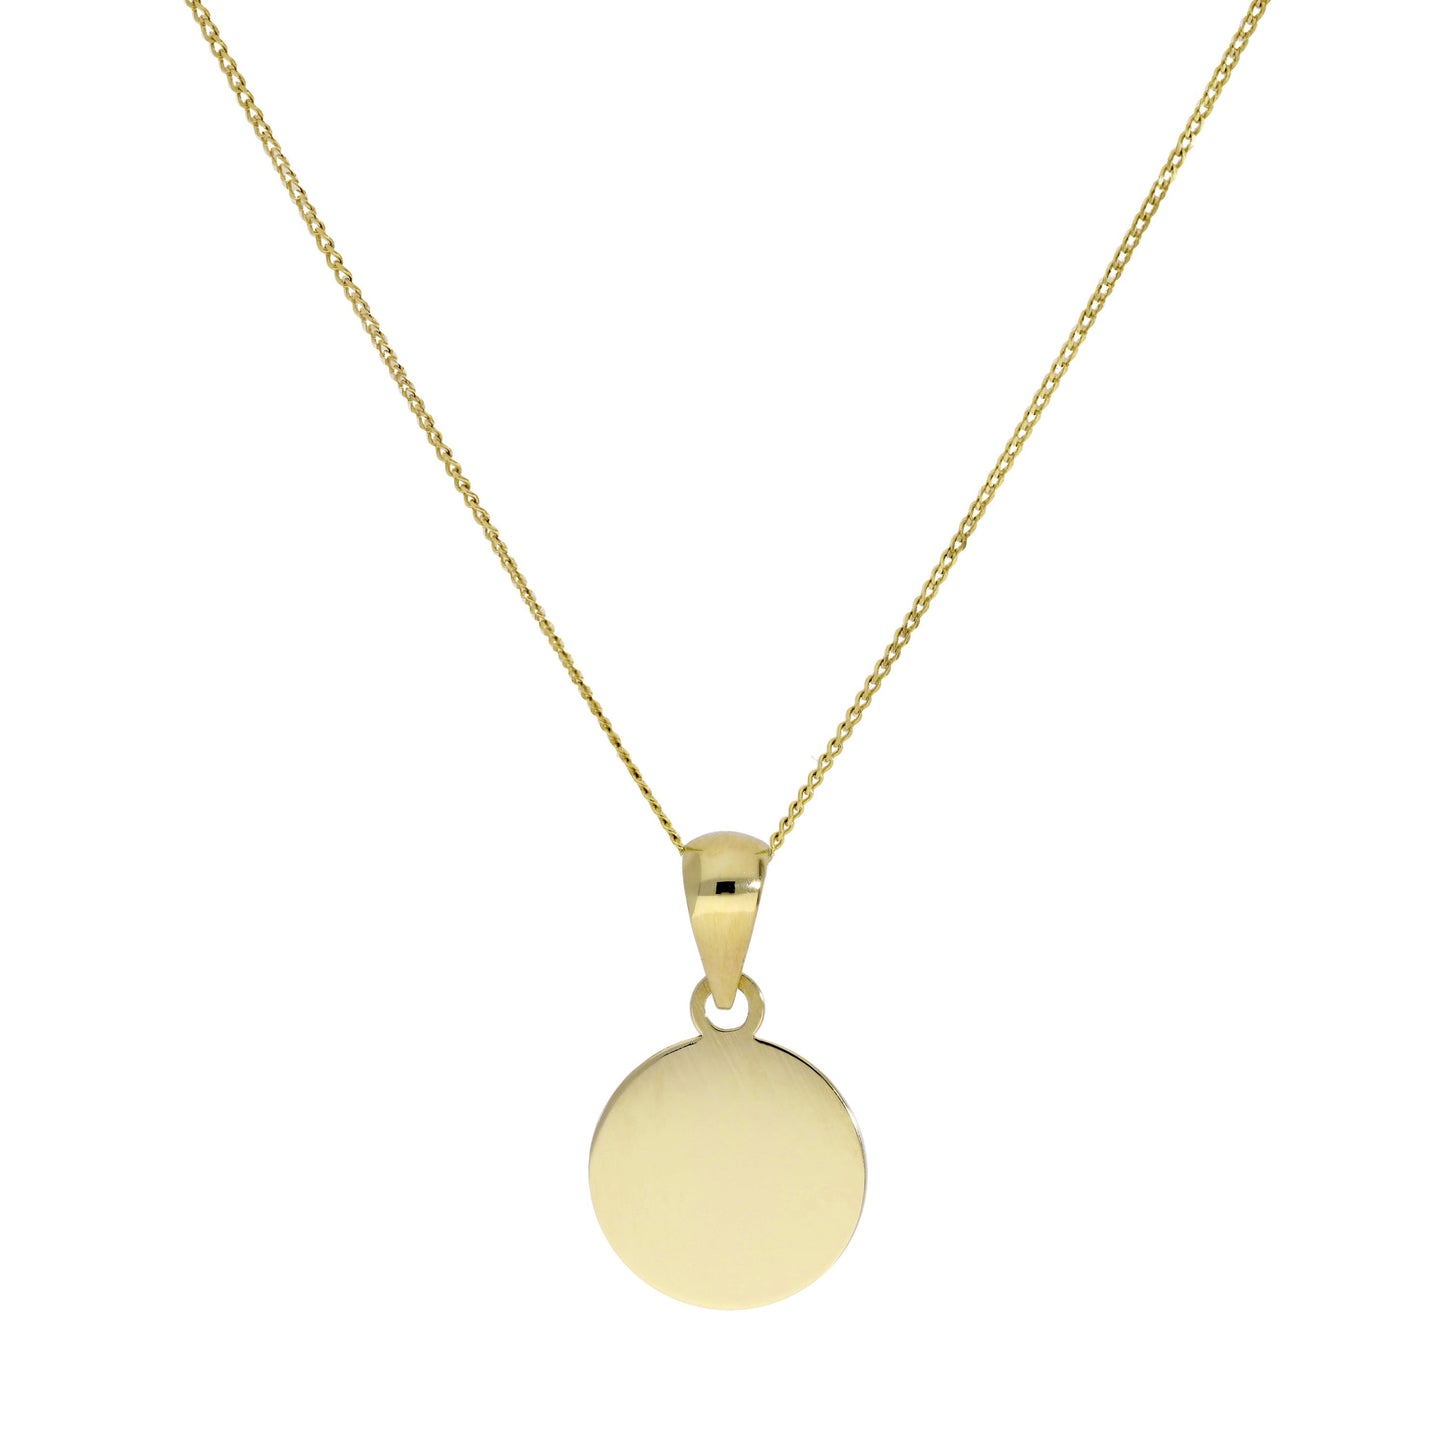 9ct Gold Engravable Round Pendant Necklace 16 - 20 Inches Chain